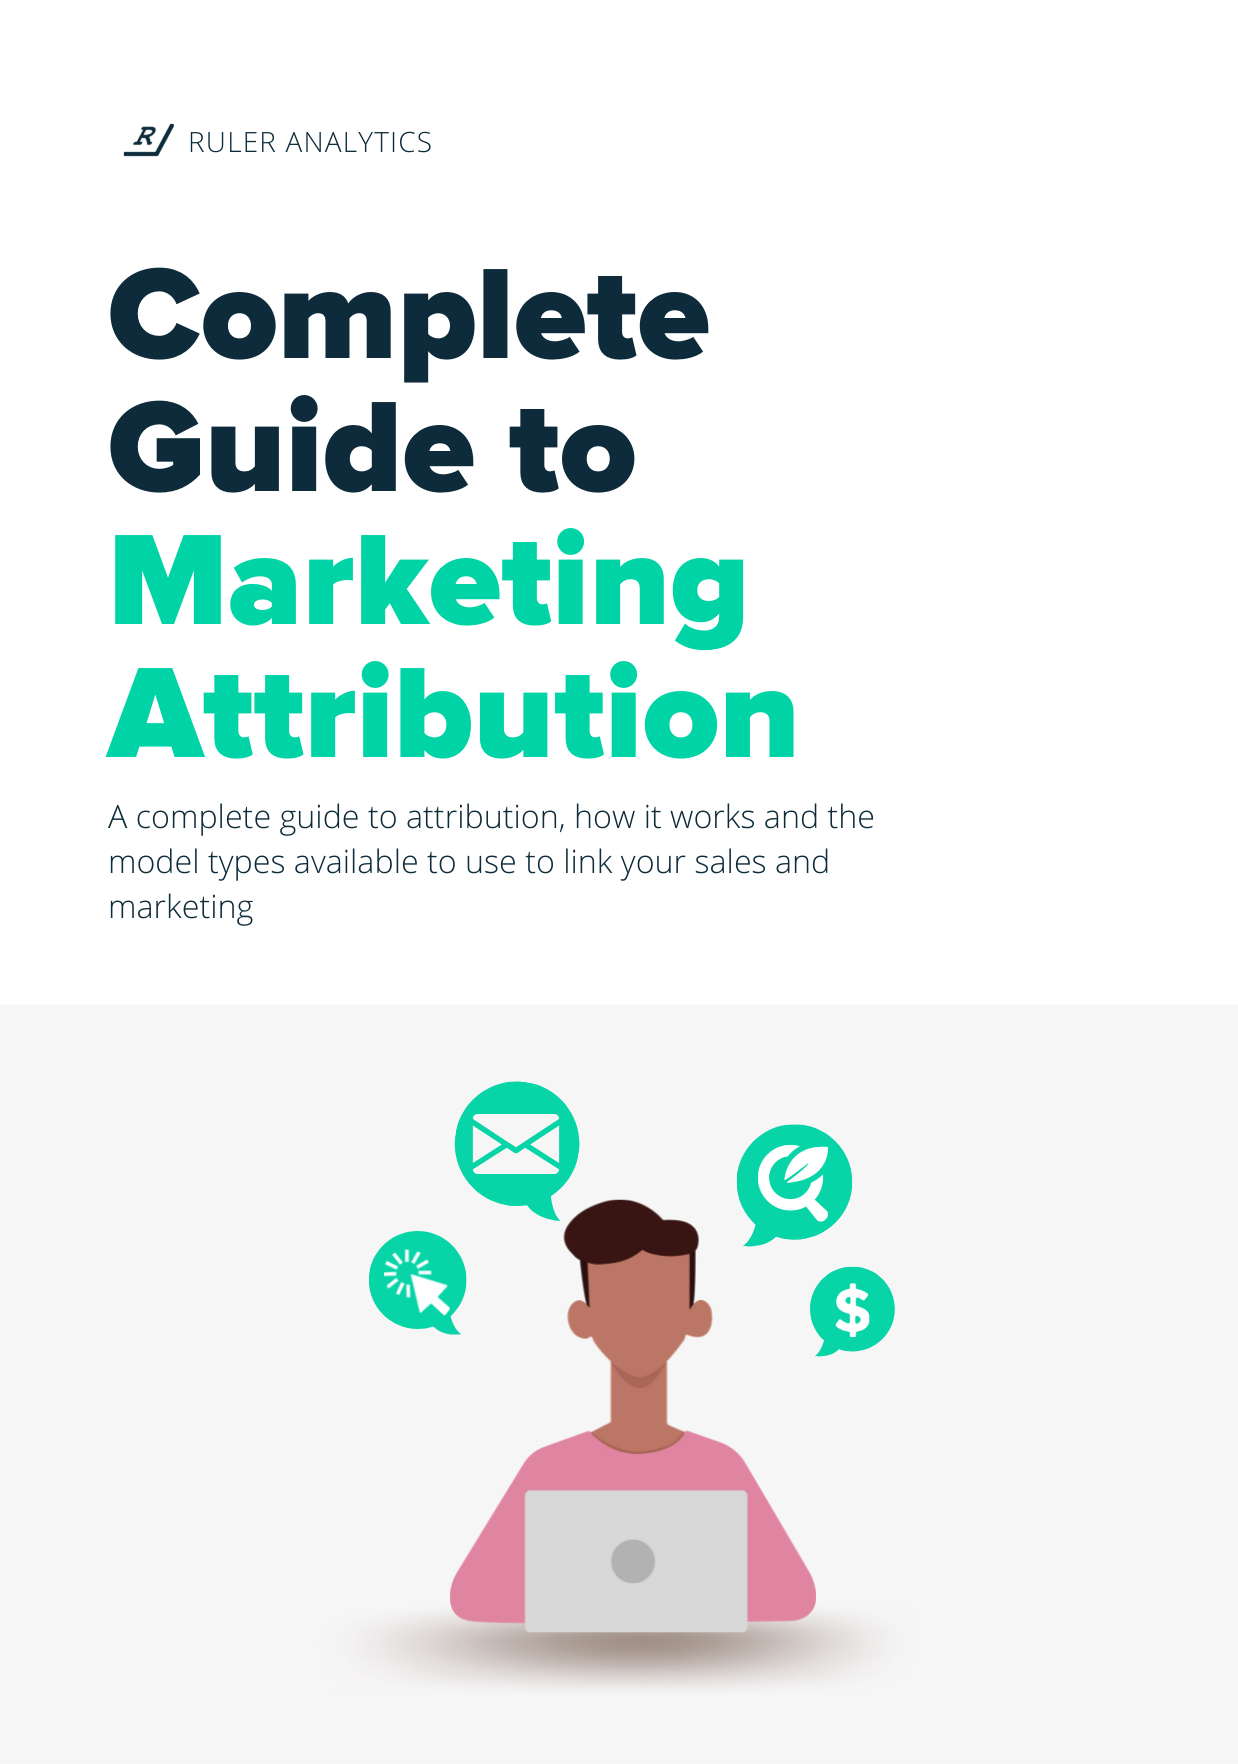 Complete Guide to Marketing Attribution